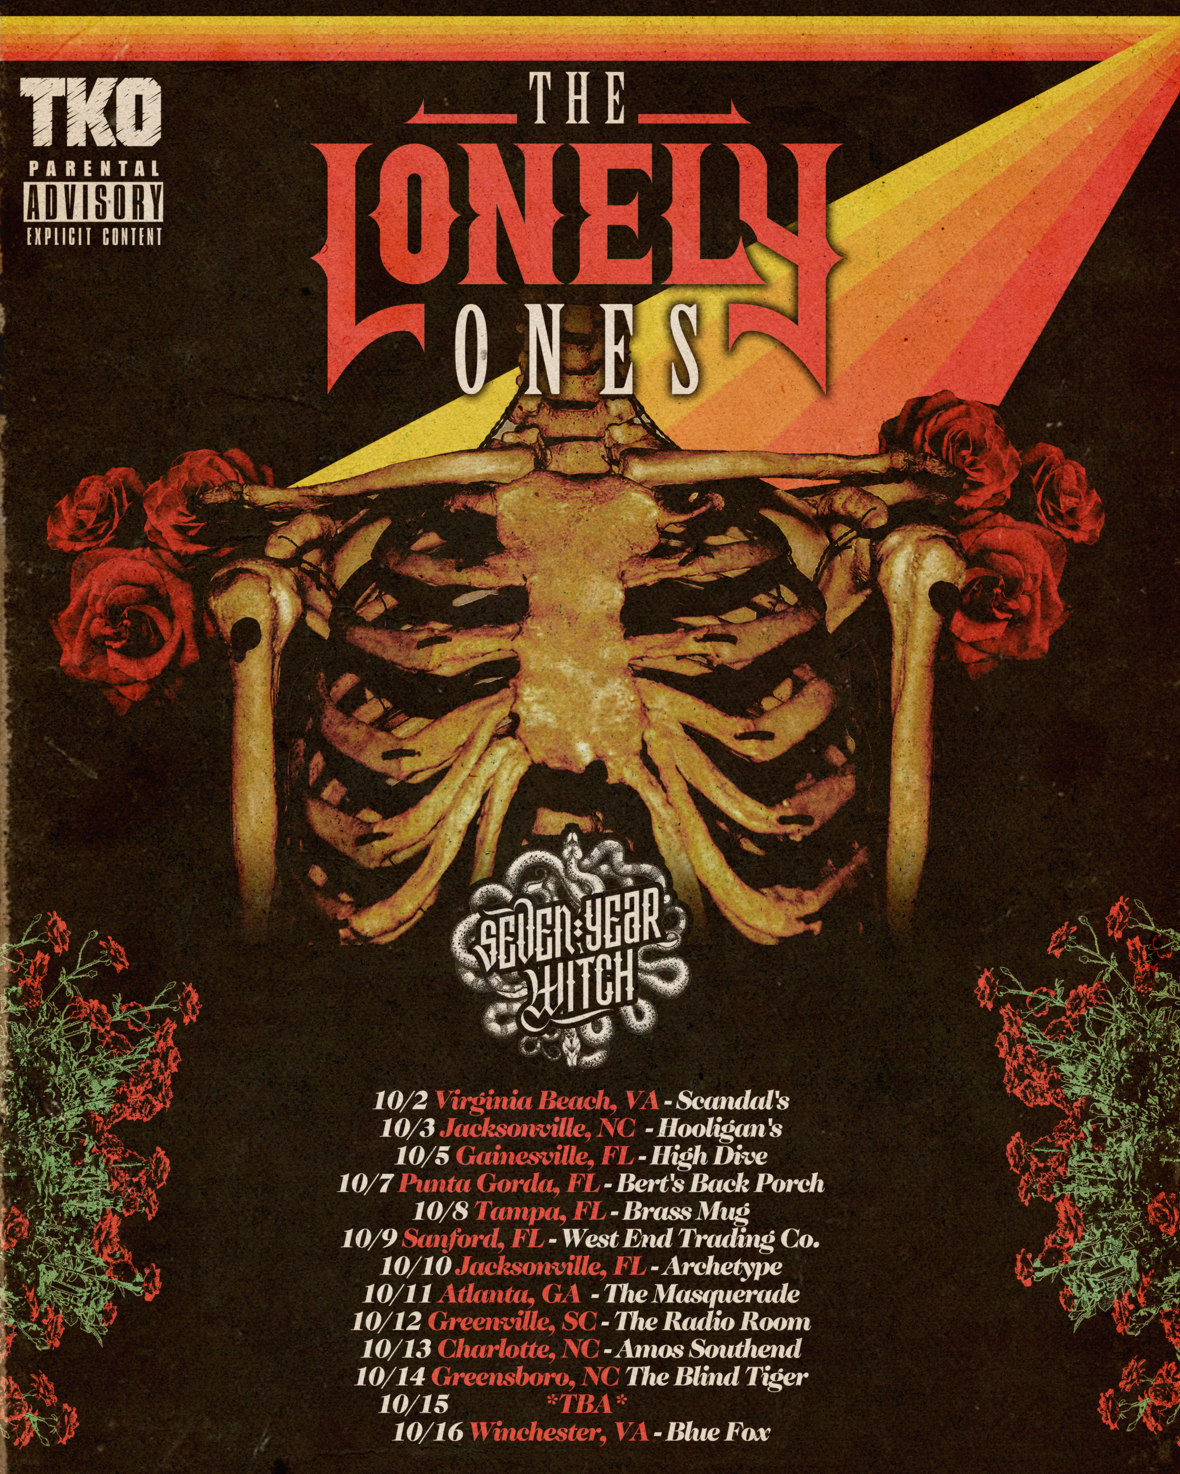 THE LONELY ONES October Tour Poster NO 10-15 PIPESTEM